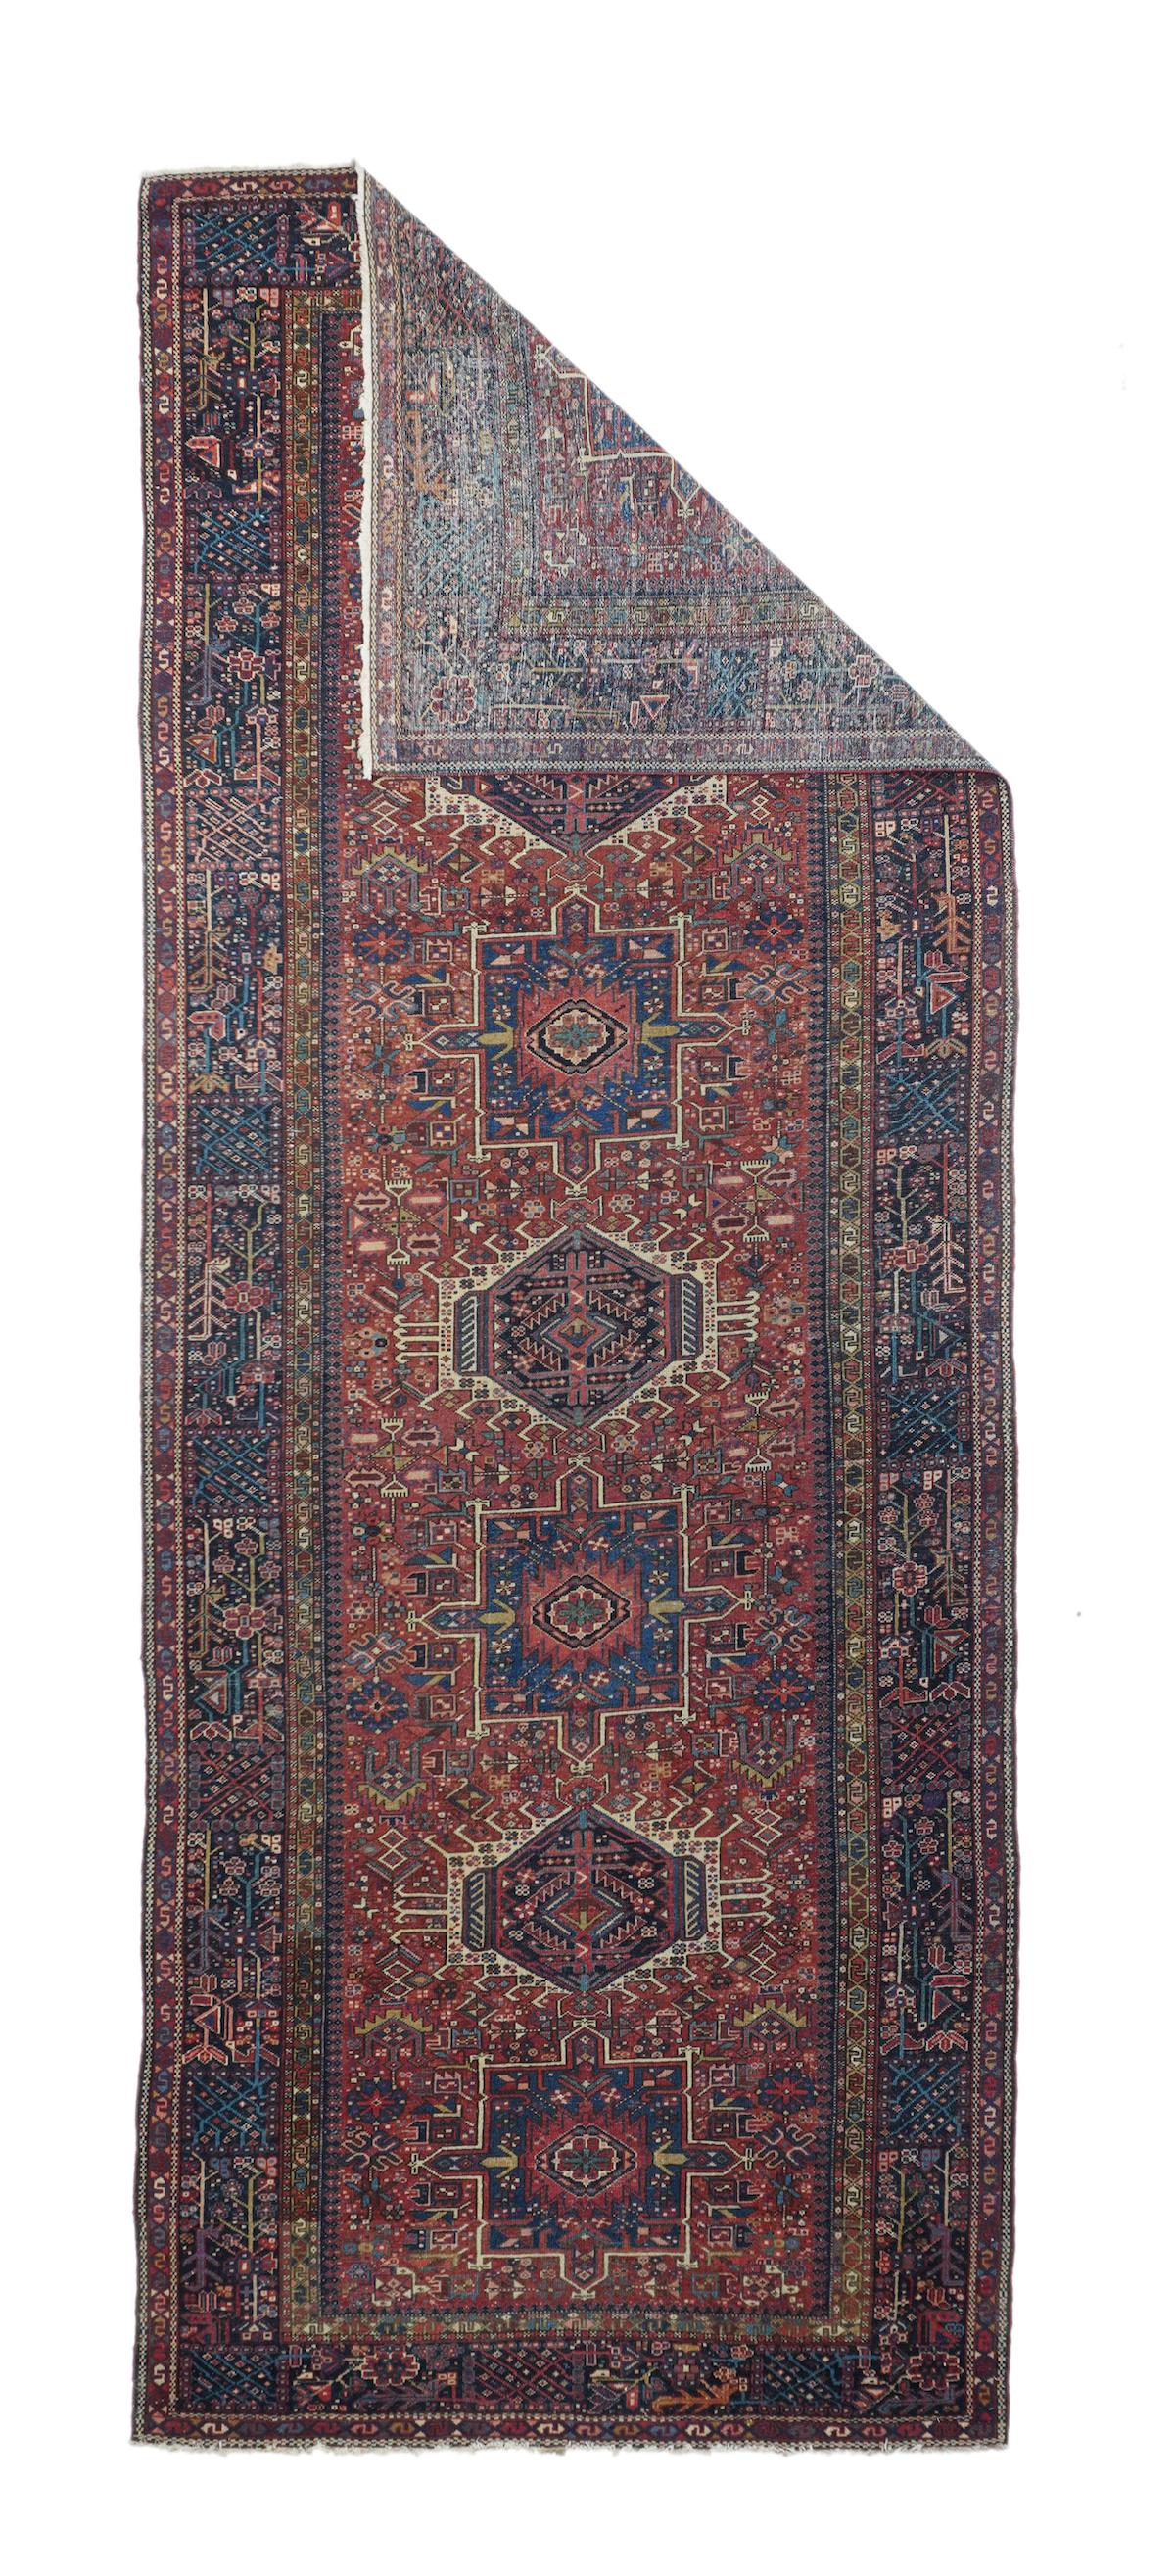 Vintage Karajeh Rug 4'11'' x 13'. The tomato field features an alternation of seven blue pointed squares and cream hook fringed hexagons. Dense scatter for geometric flowers, stars and rosettes. Dark blue border of floret squares, herringbone leaves